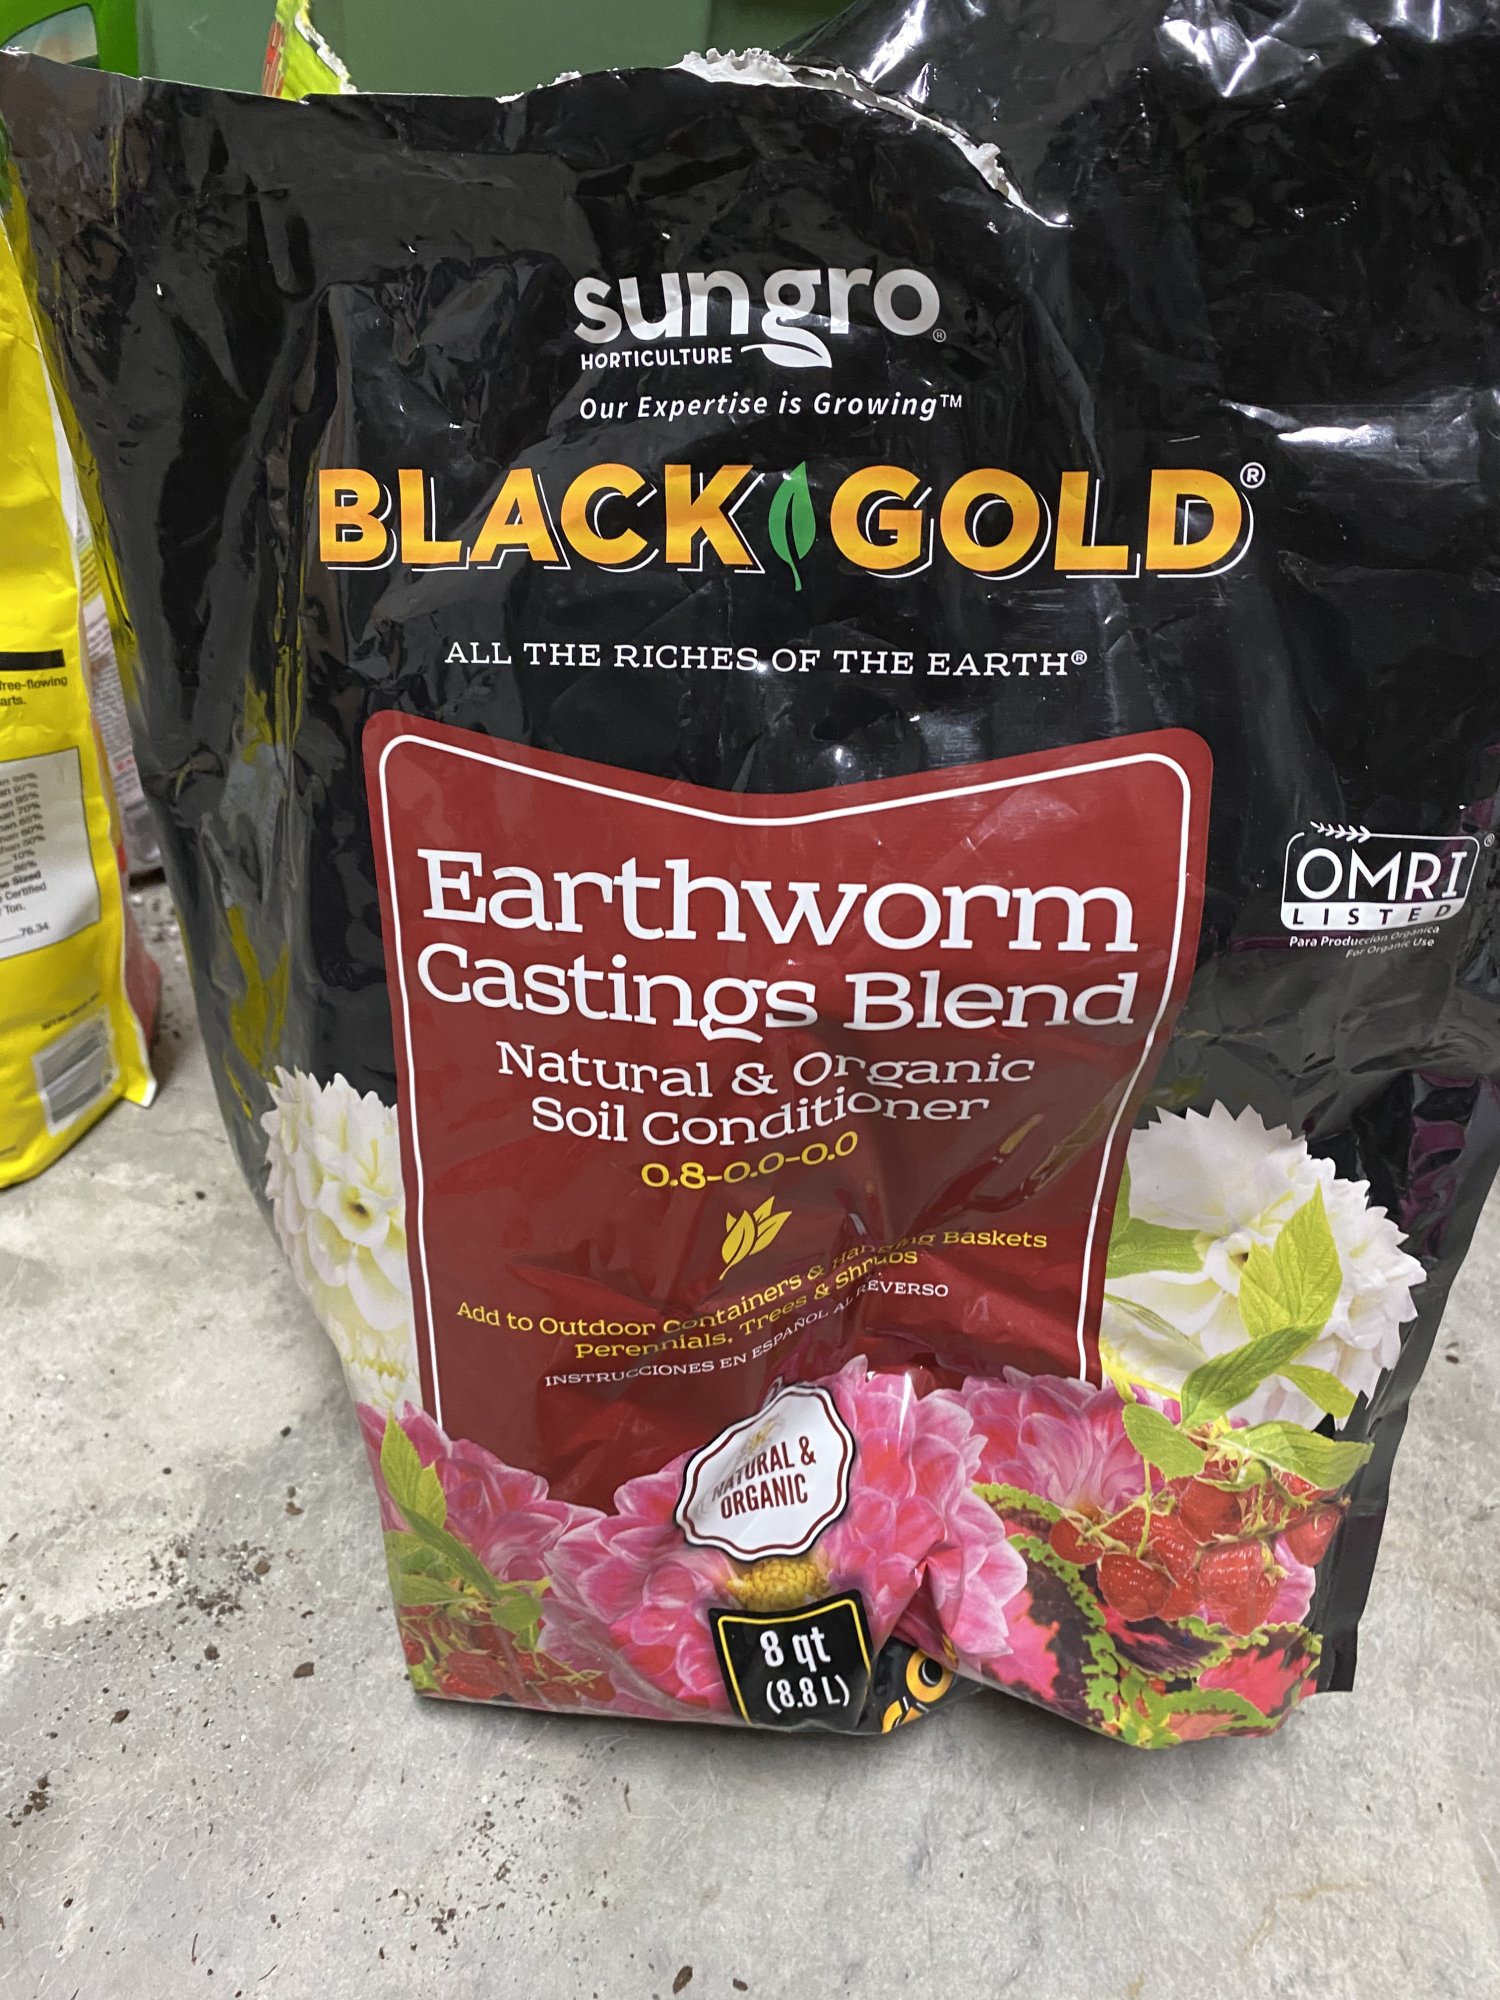 Has anyone used black gold w earthworm casting blend